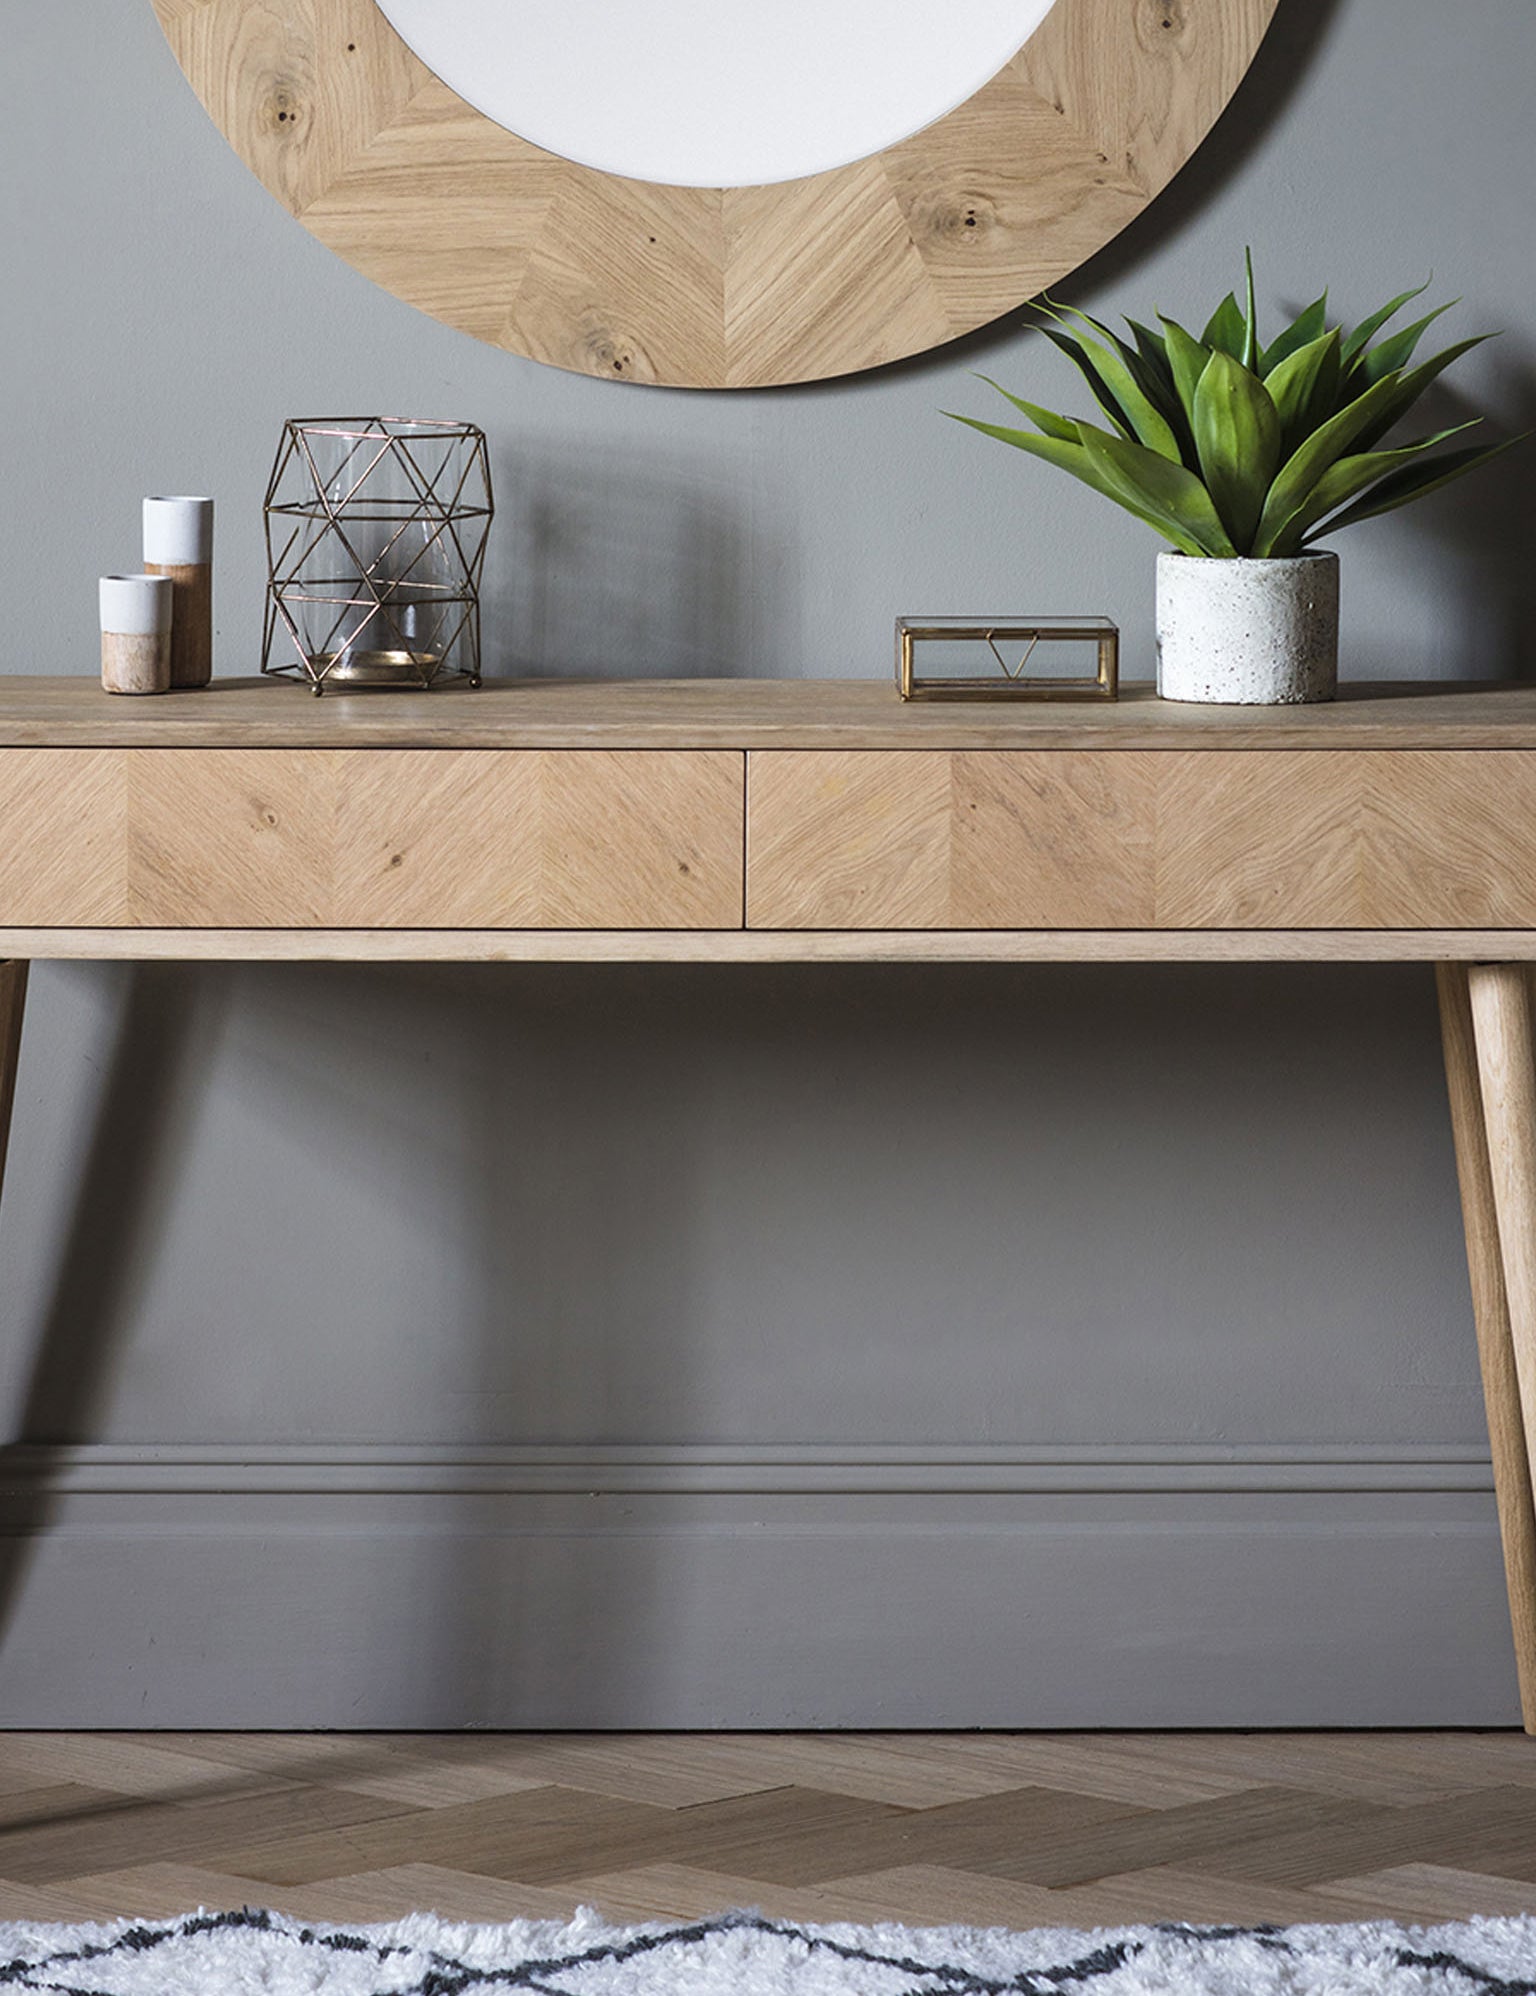 Oak two drawer console table with chevron design